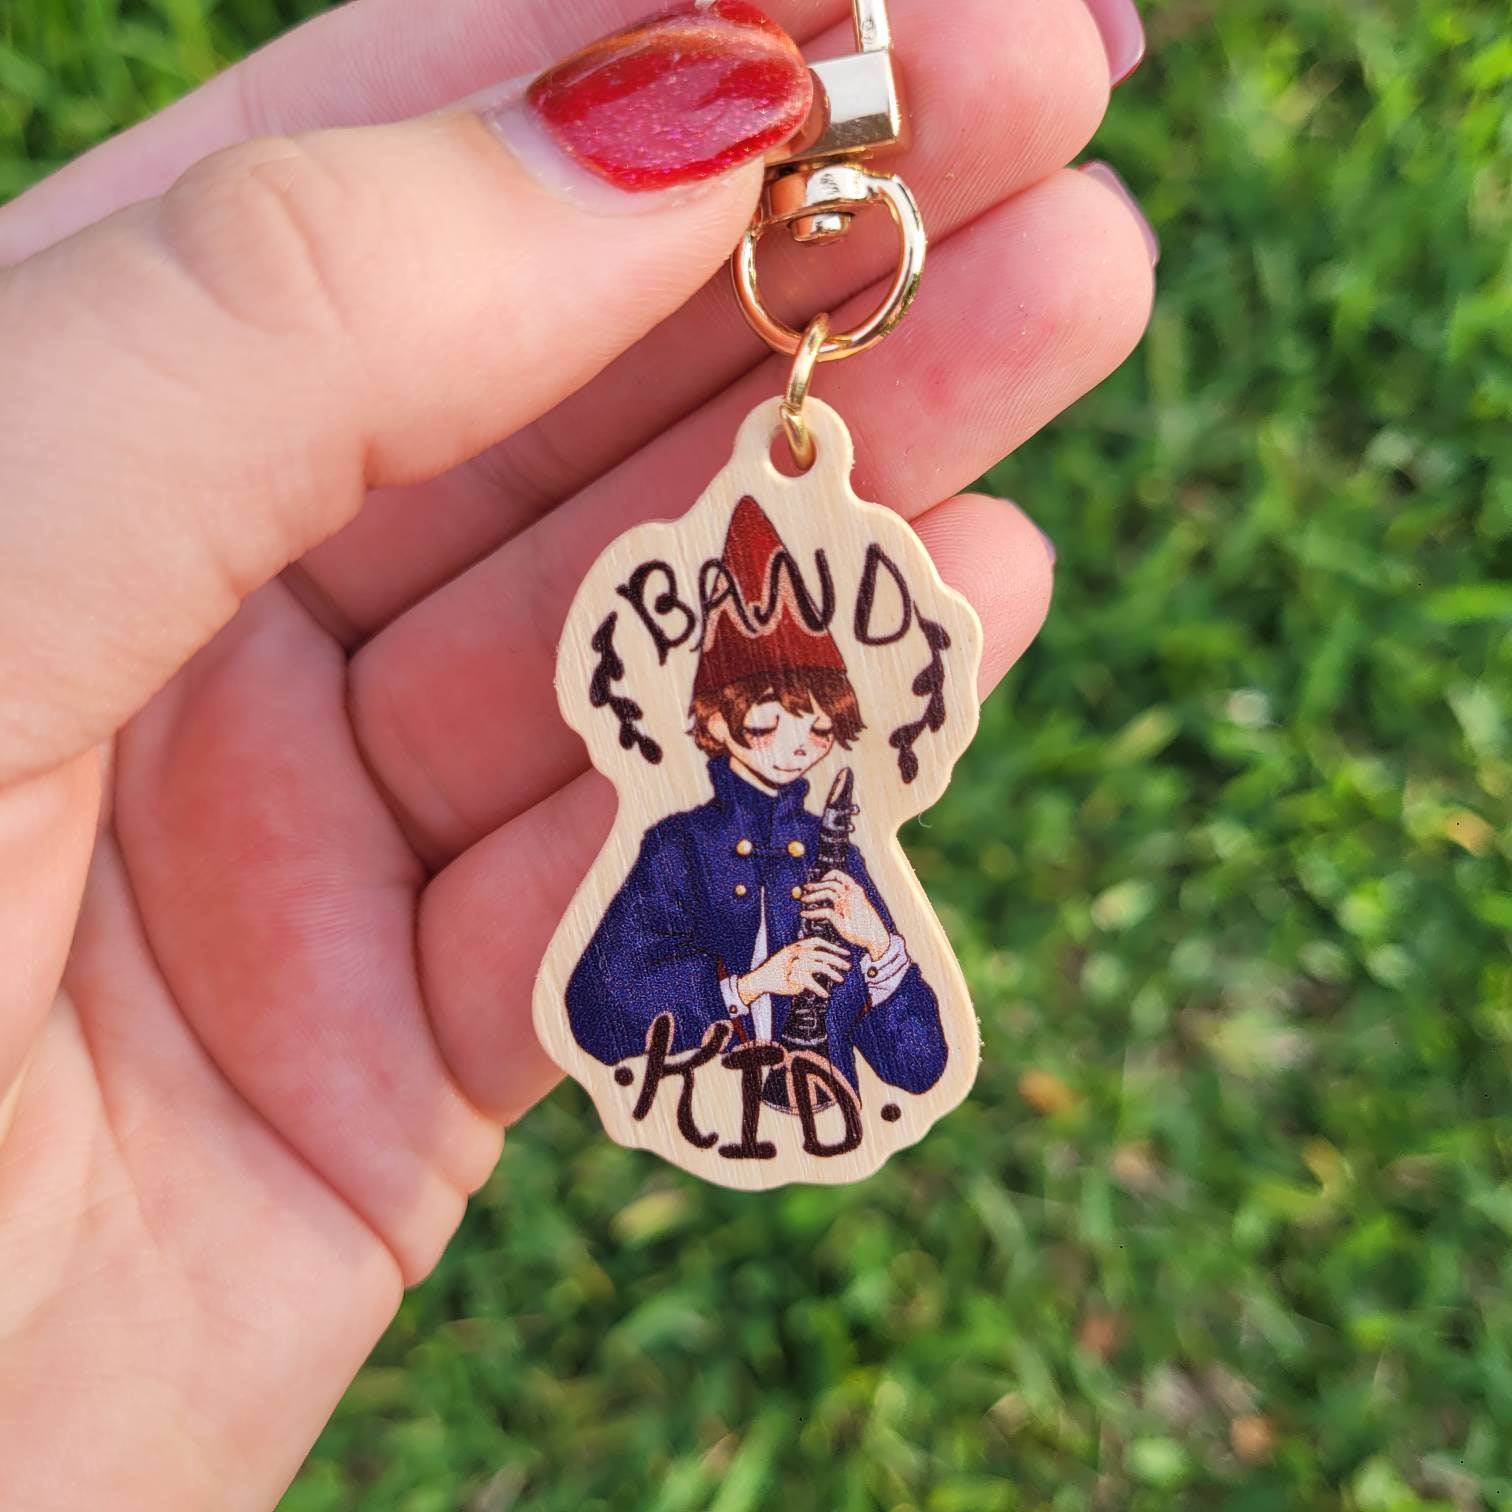 Over The Garden Wall the Older Brother Keychain Classic Celebrity Keychain